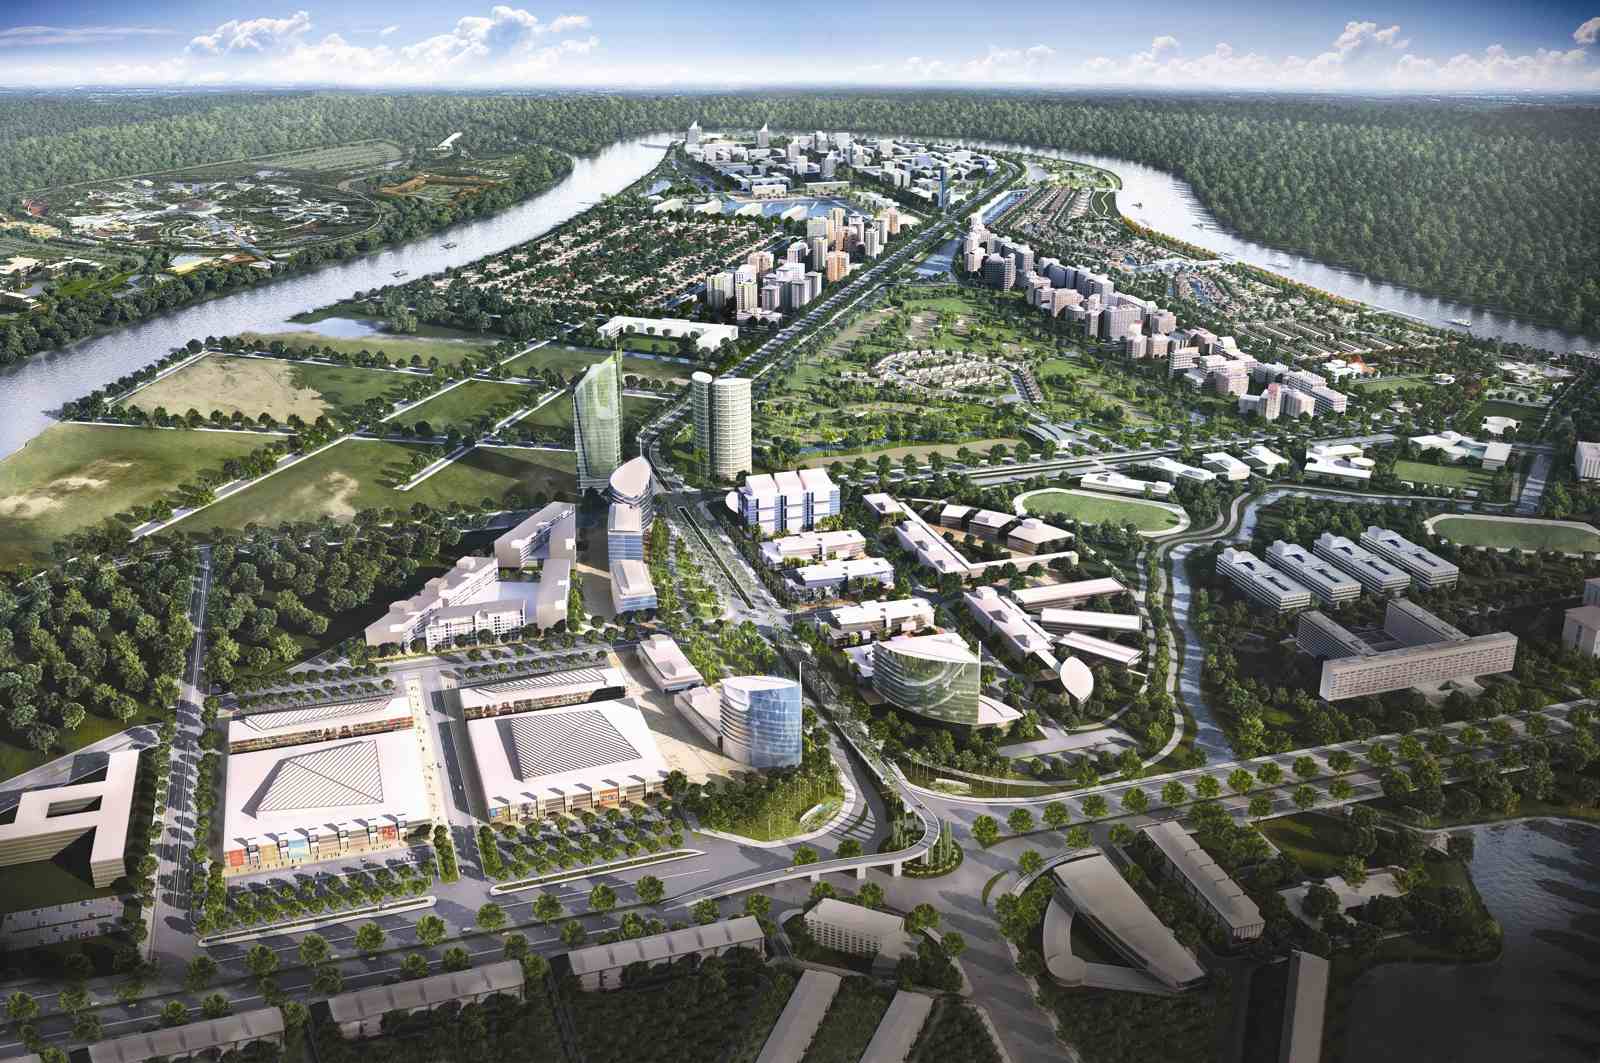 2023: Will the real estate market near Ho Chi Minh City recover?